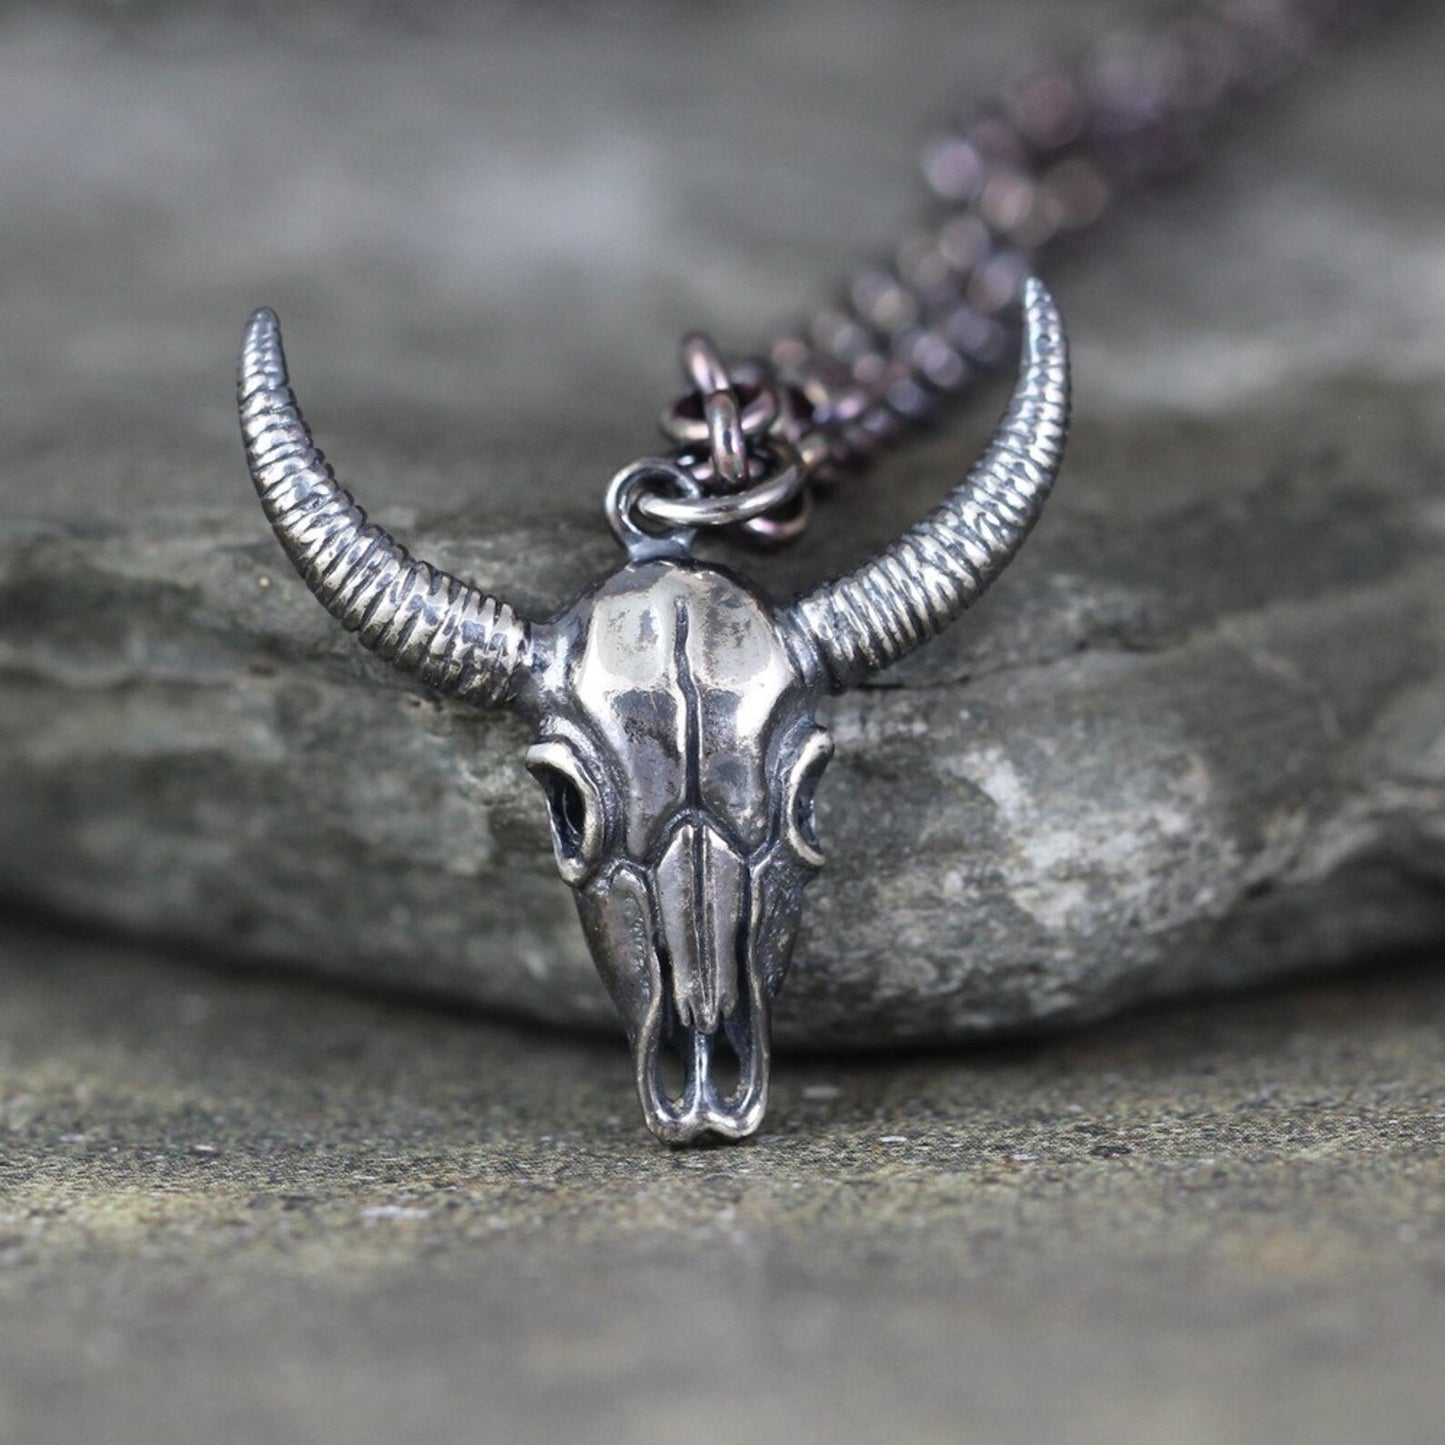 Cow Skull Pendant - Sterling Silver - Rustic Western Jewellery - Cowboy Necklace - Stampede - Bull Head